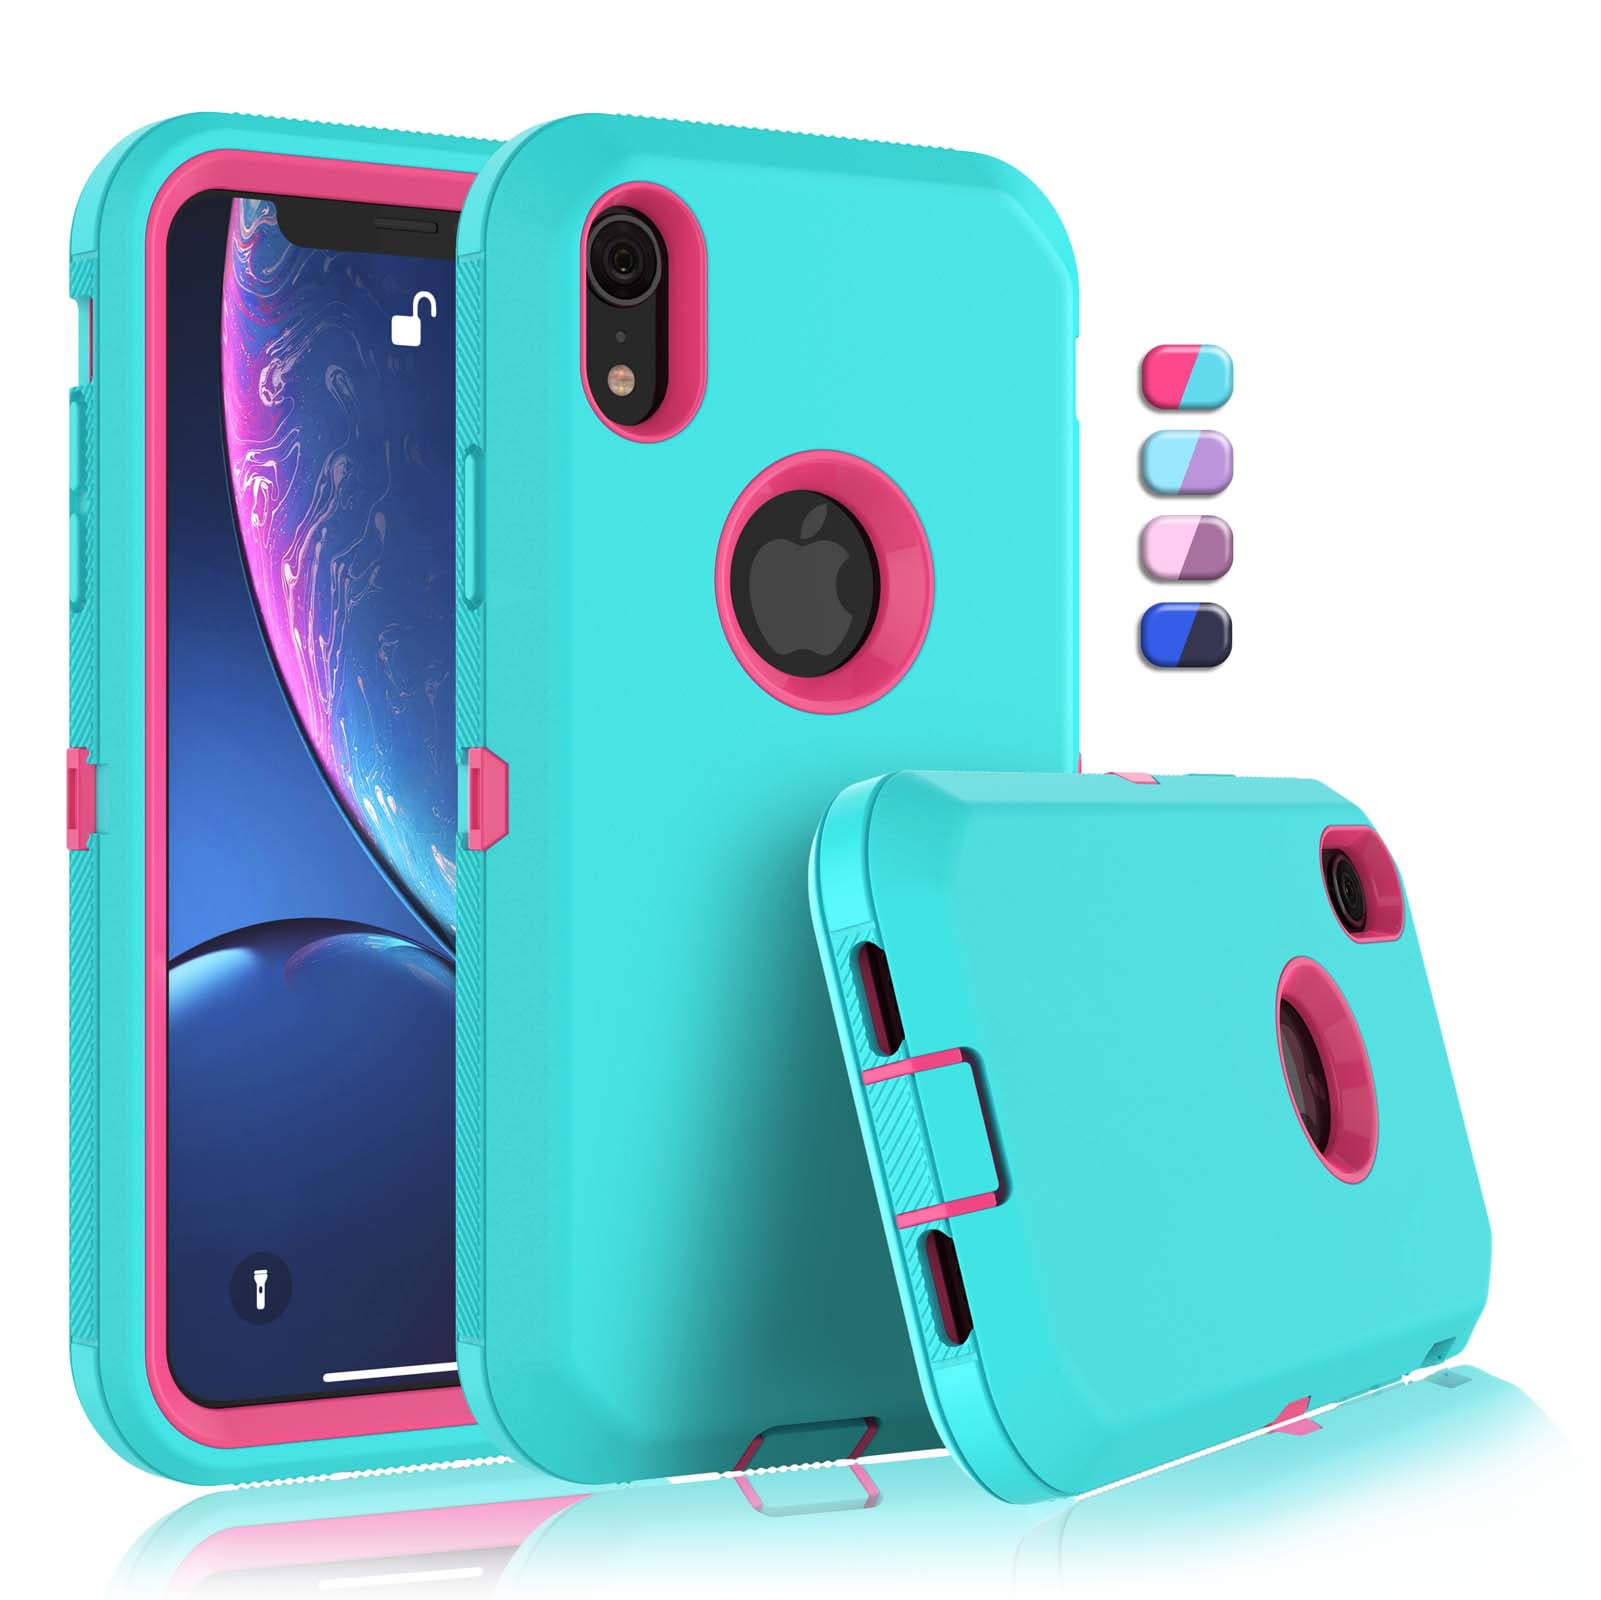 6.1 Inch Shockproof Full Body Heavy Duty Protection Case For iPhone XR 2018 